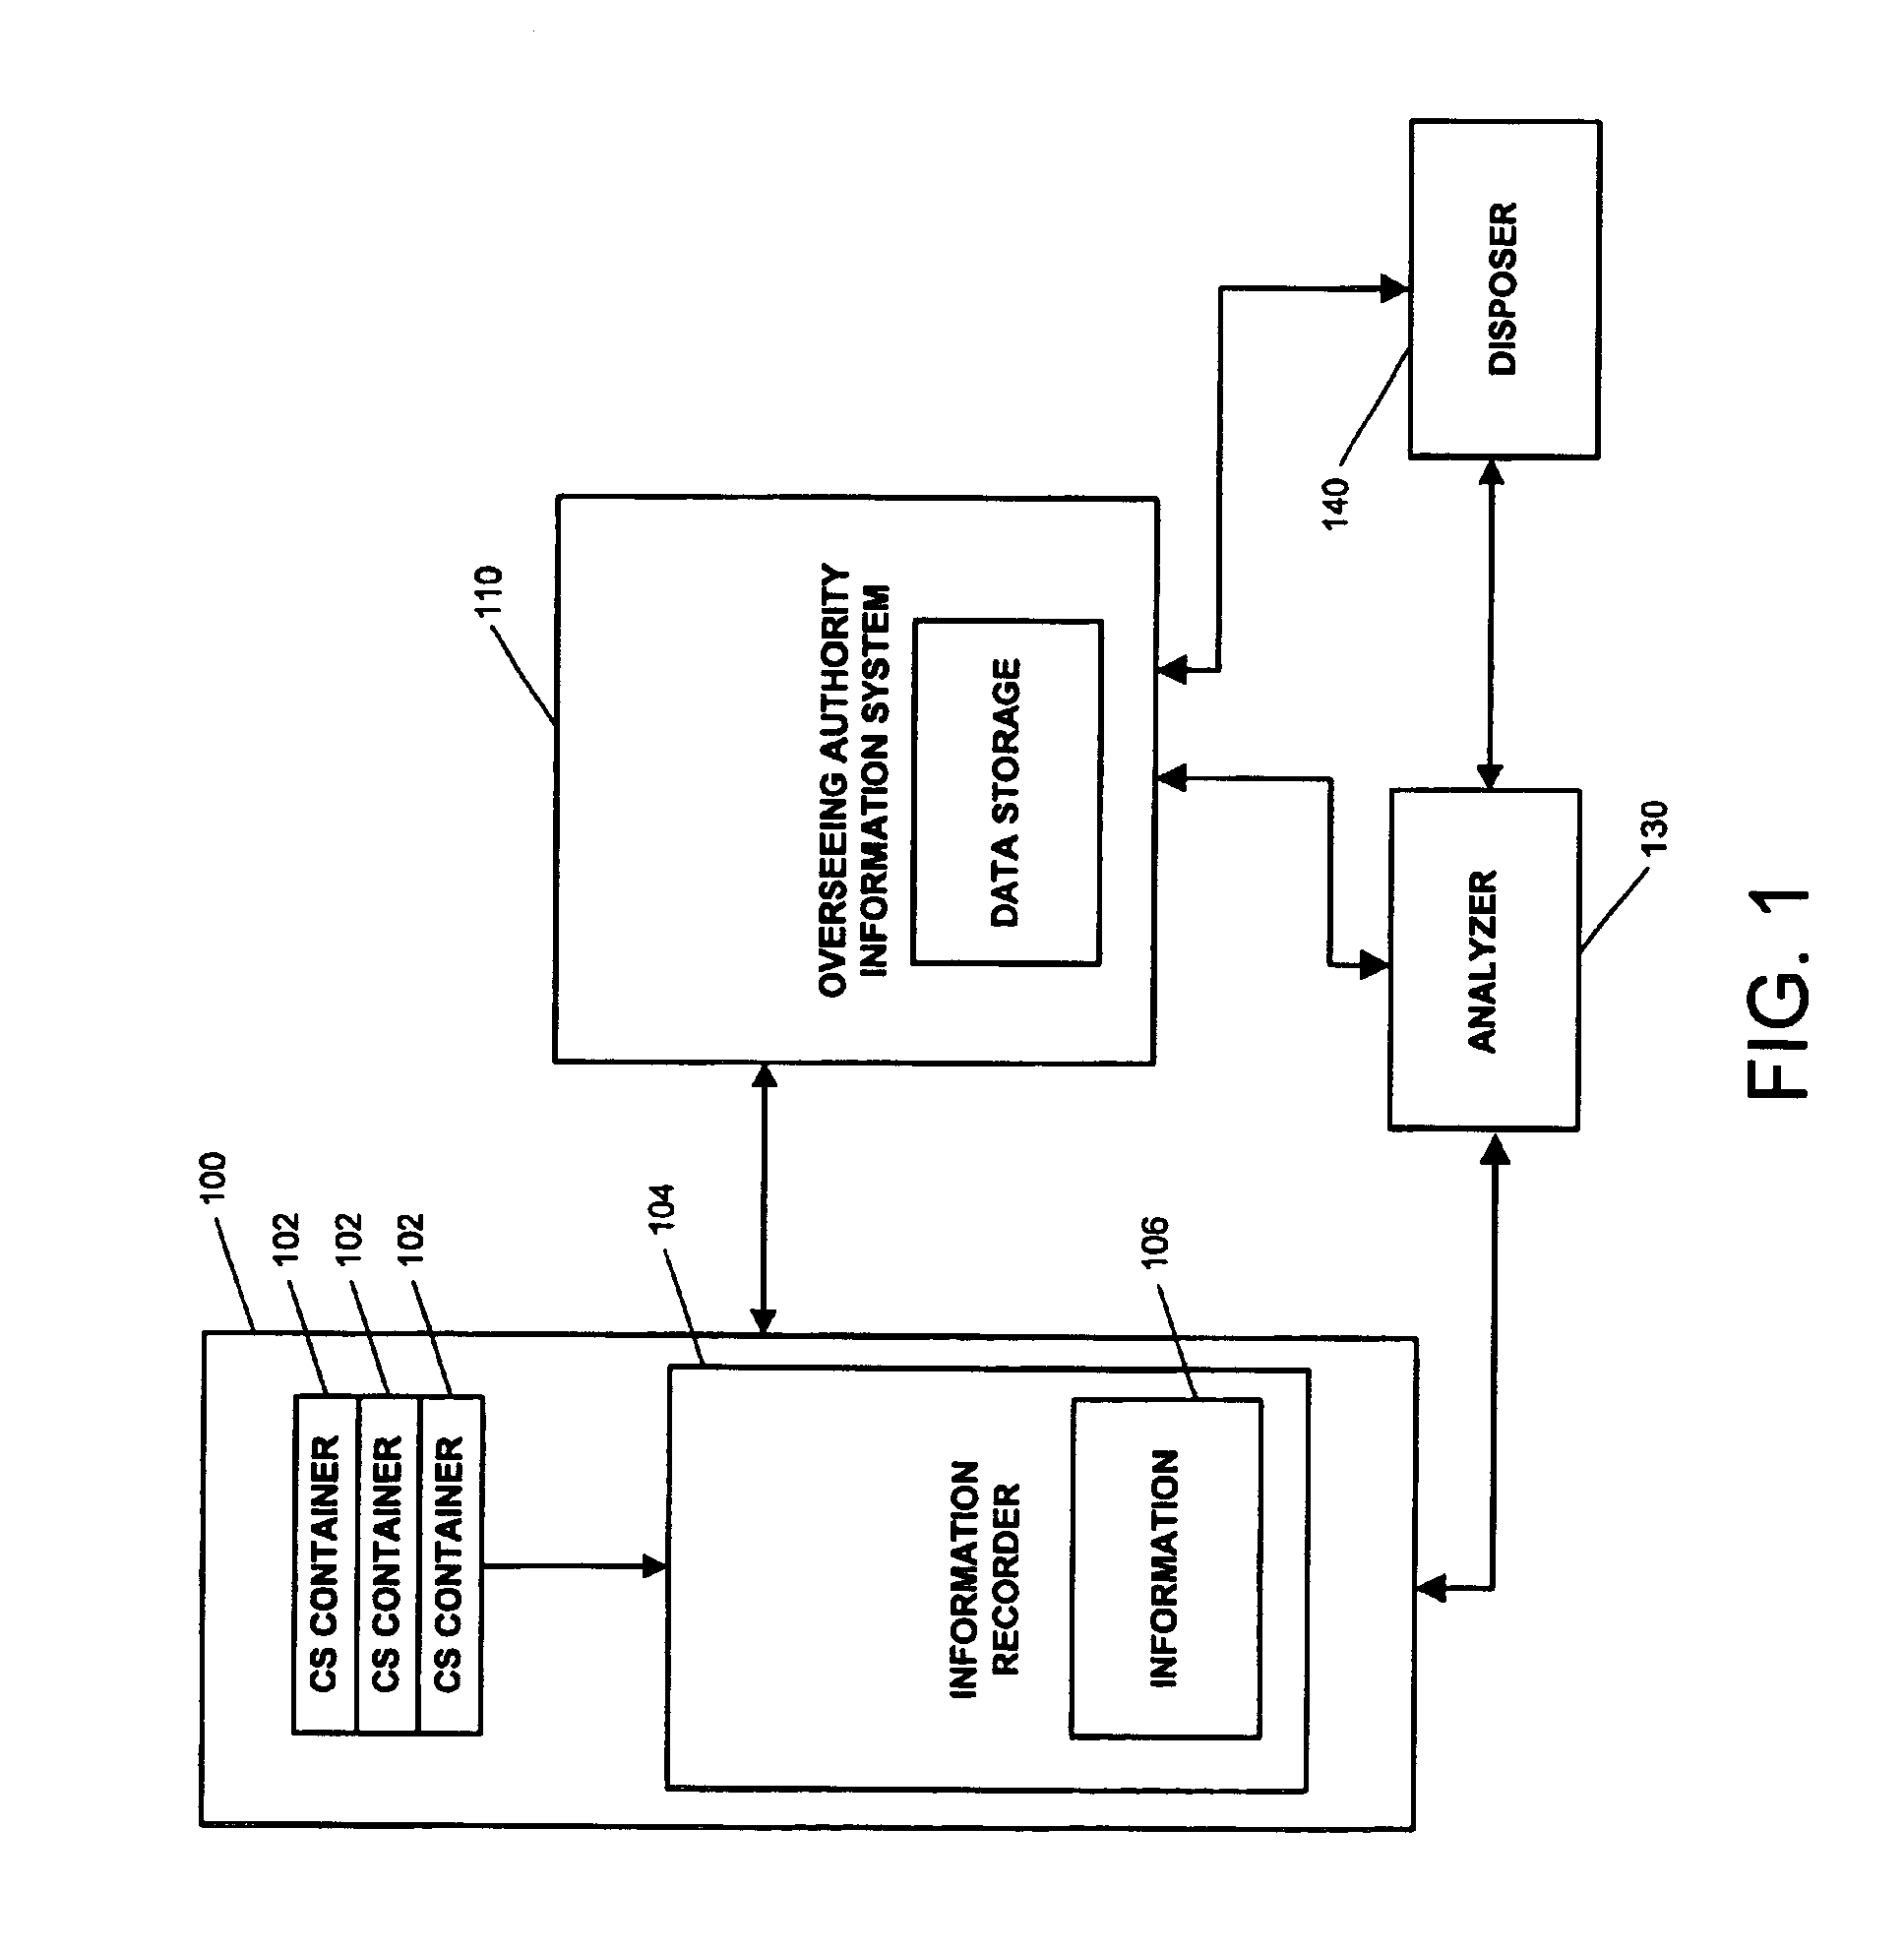 Controlled substance analysis, wastage disposal and documentation system, apparatus and method